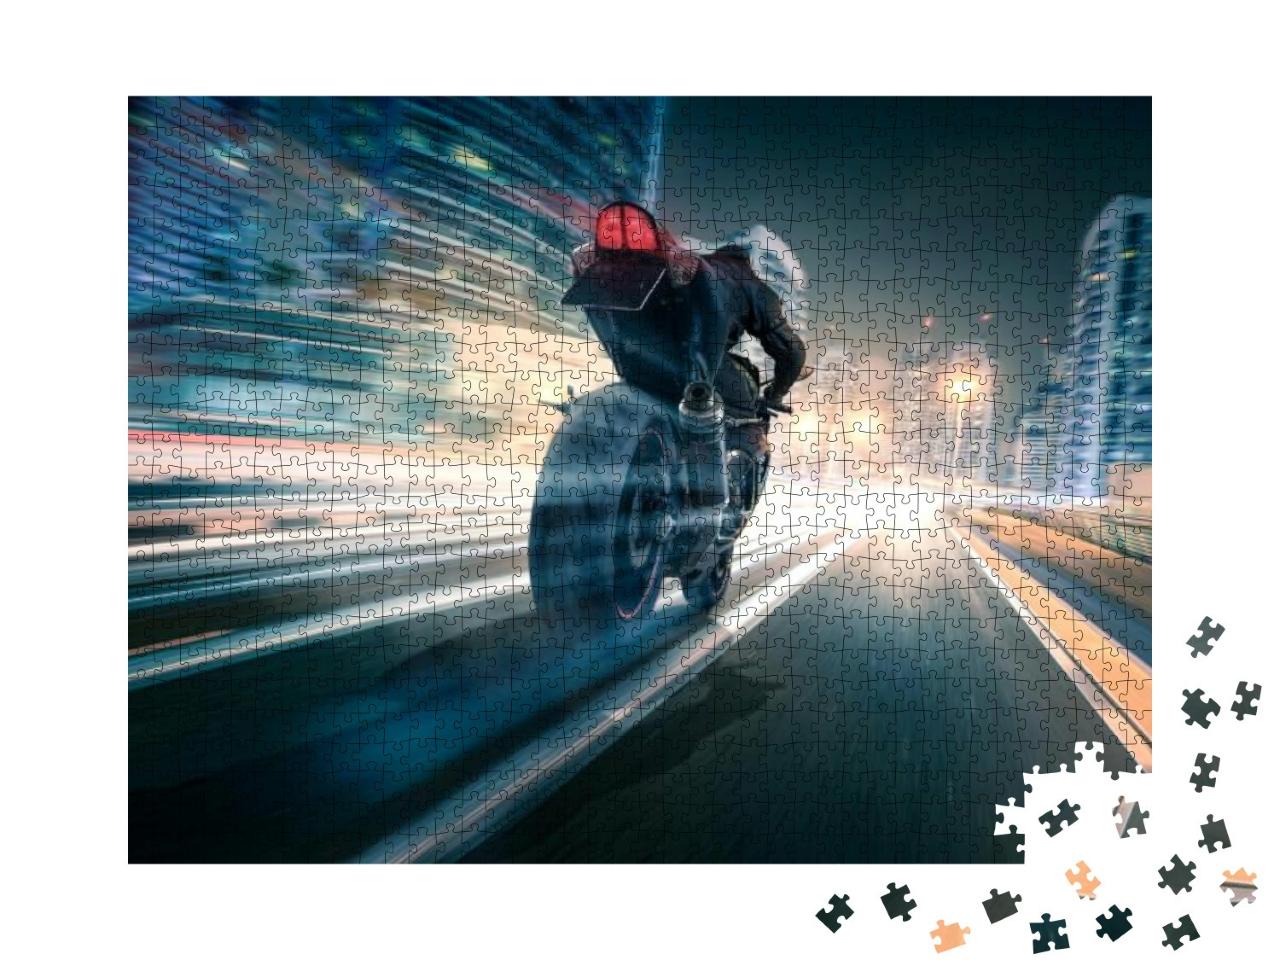 Motorcycle Drives Through a City At Night... Jigsaw Puzzle with 1000 pieces